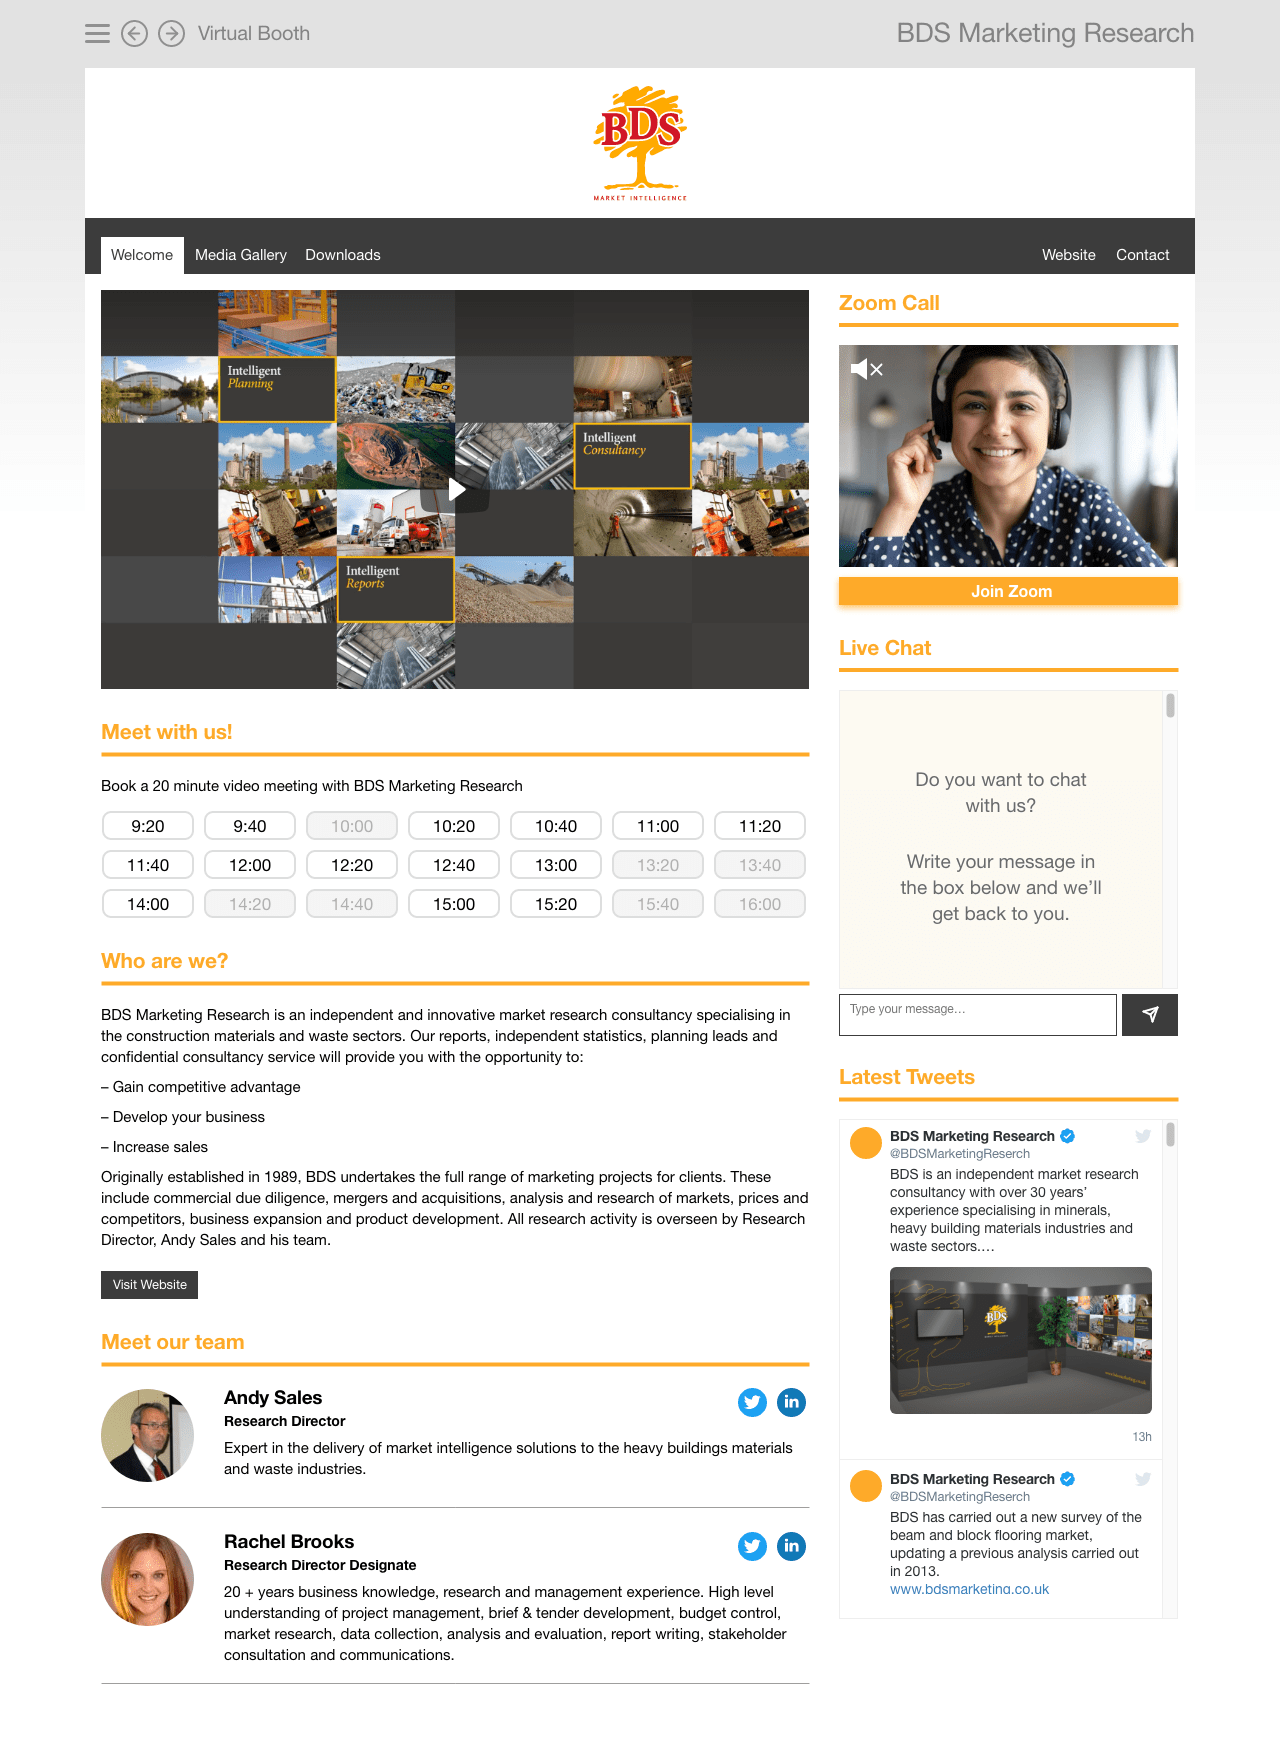 Hillhead digital exhibitor booth welcome page example with branded content, meeting slots, live chat and networking